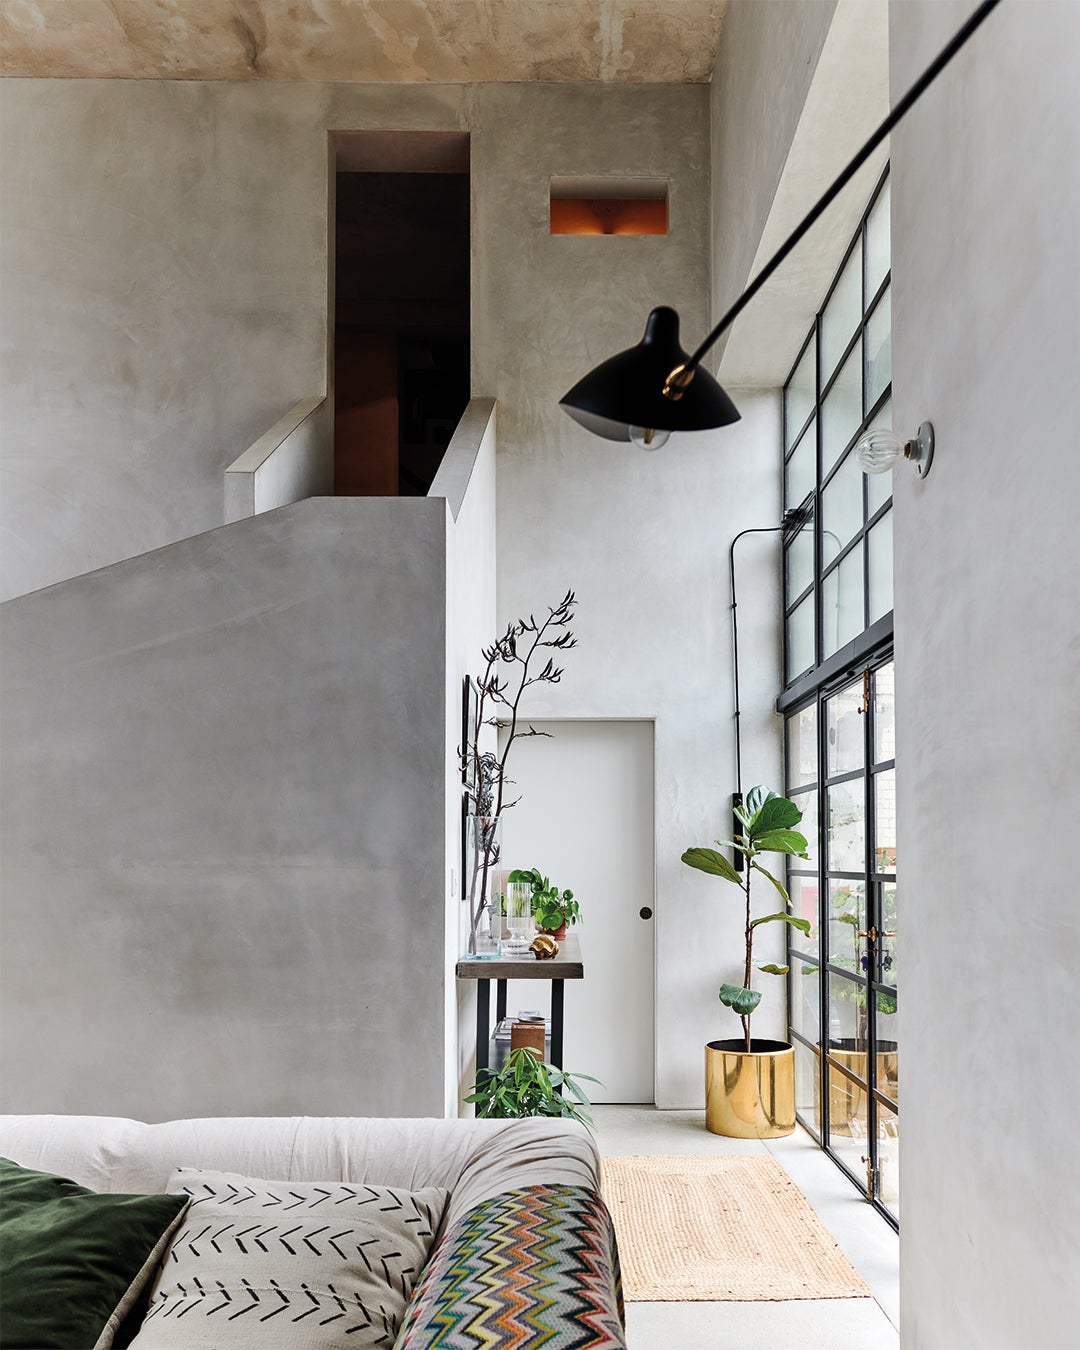 double-height room with gray plaster walls